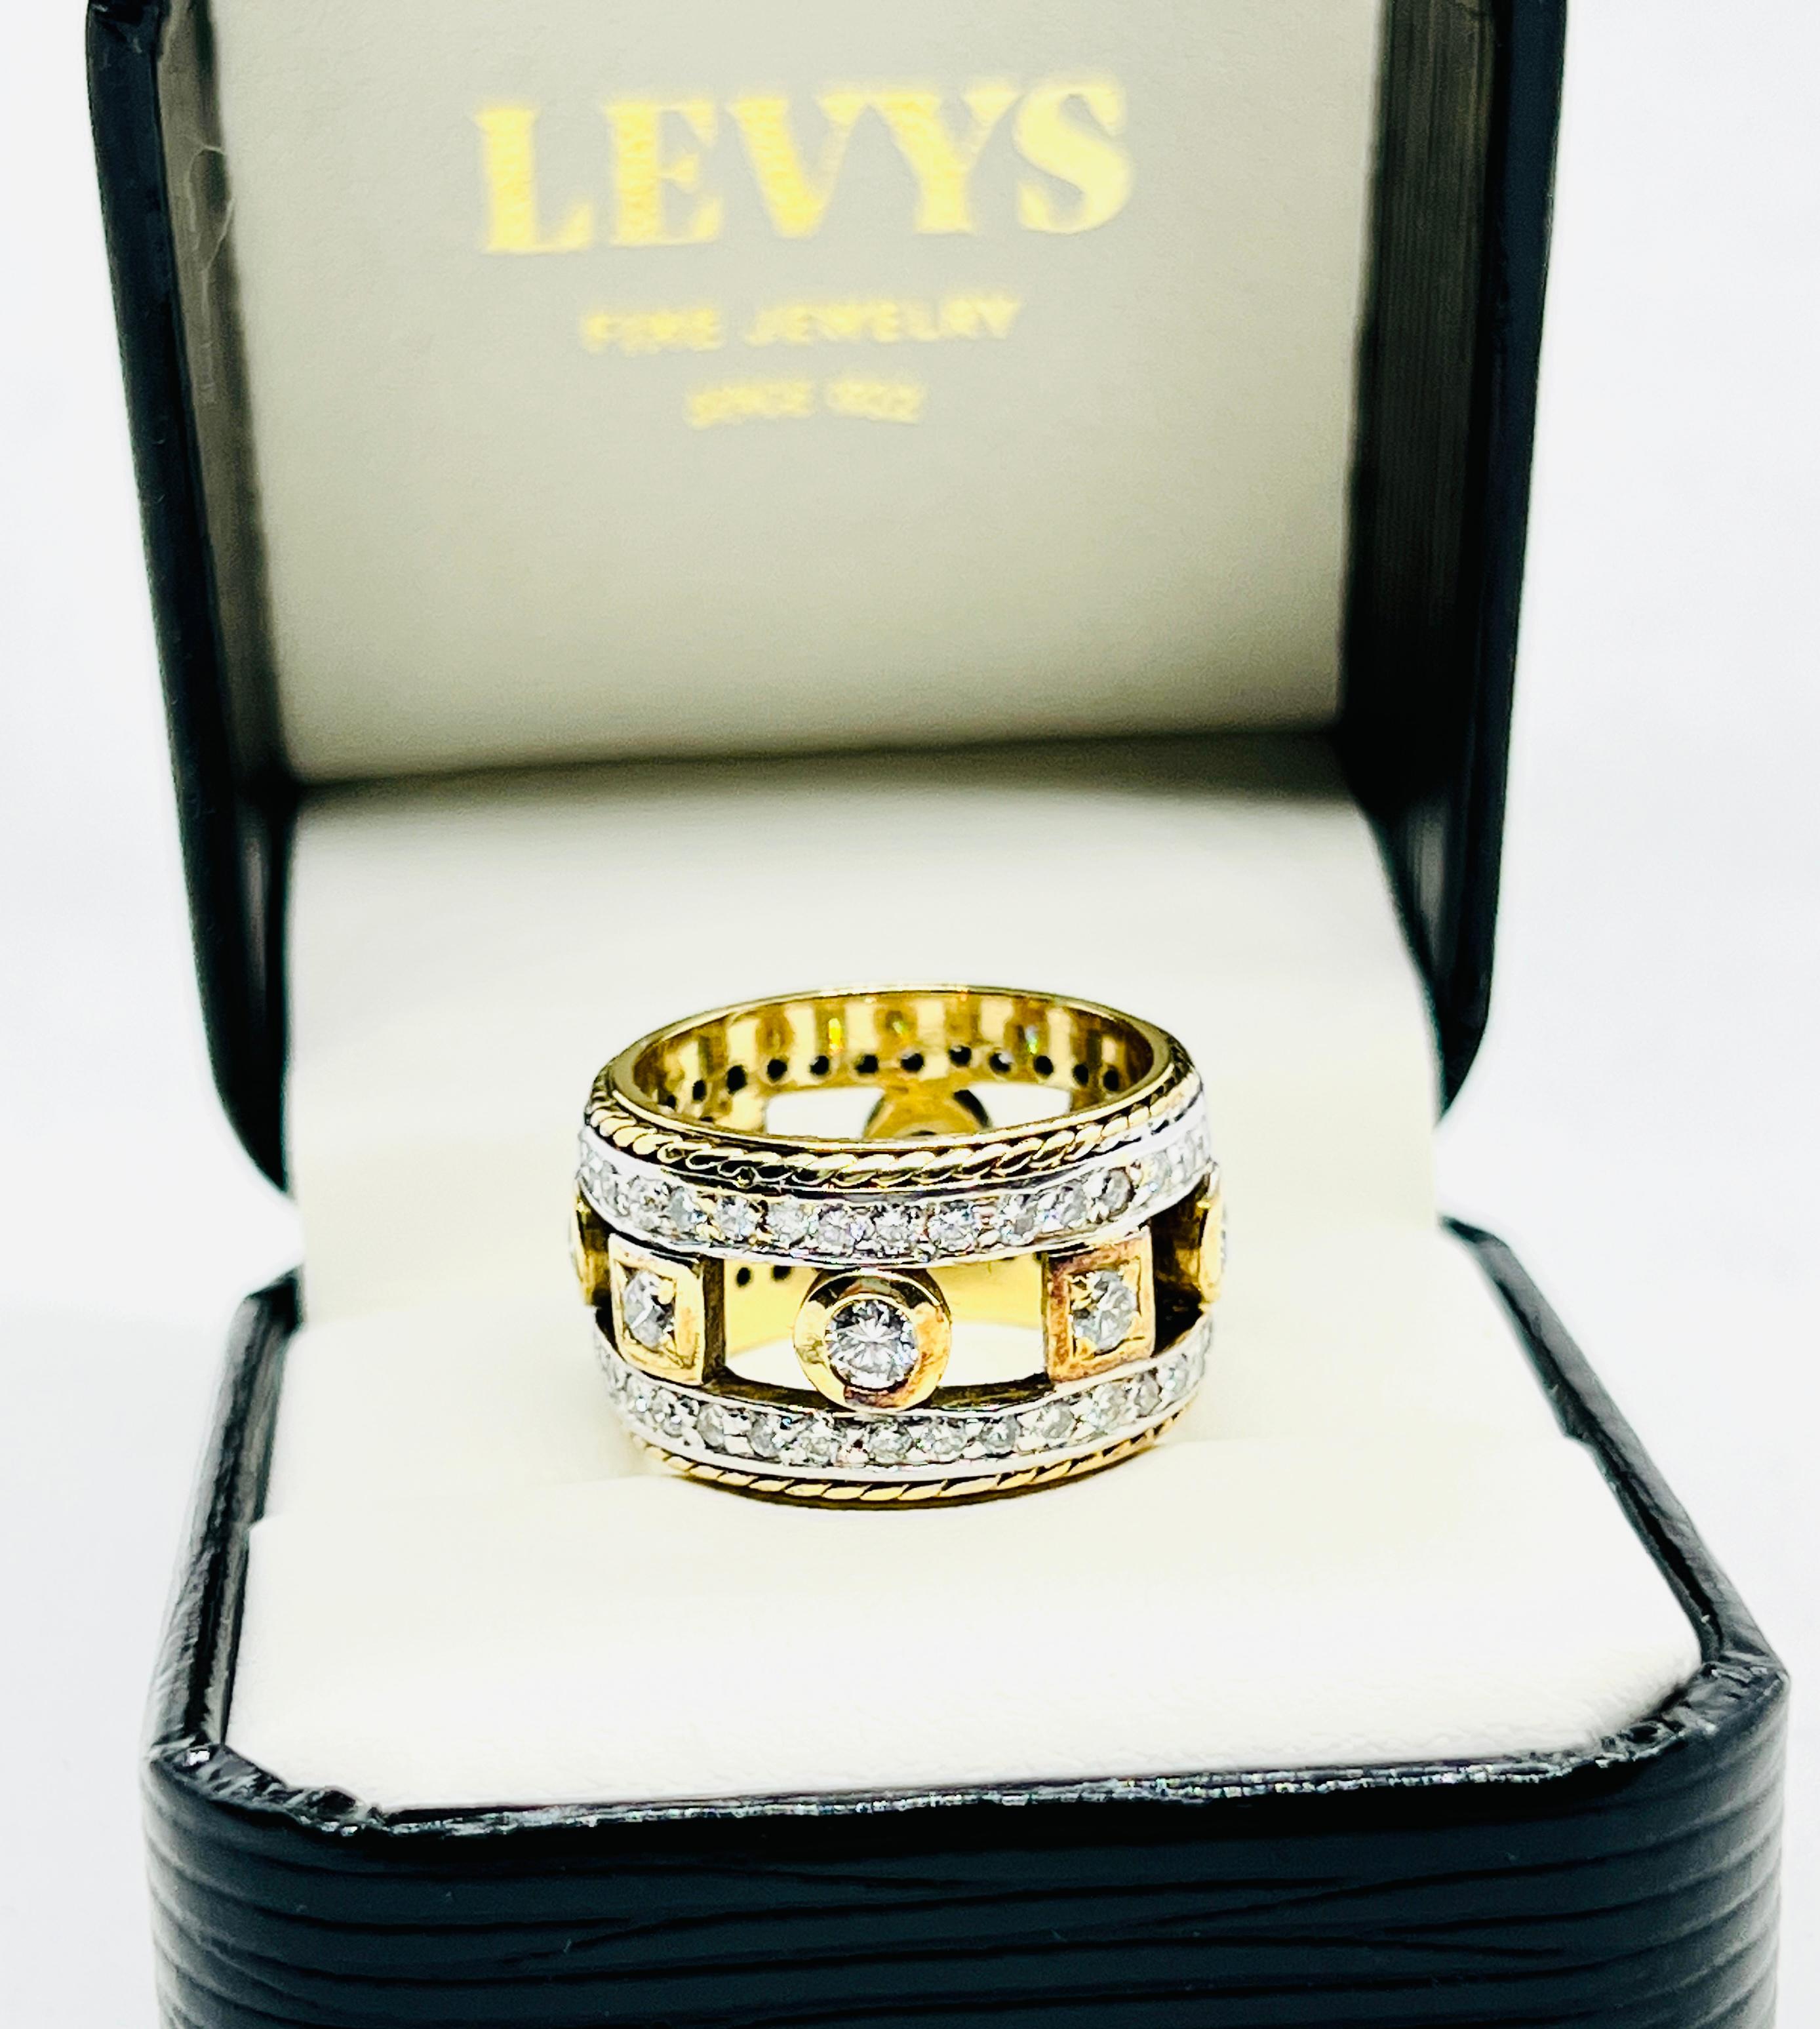 Gorgeous Penny Preville Estate Band. Penny Preville band in 18k yellow gold with 4 bezel-set and 70 prong-set round brilliant diamonds weighing approximately 1.5cttw. The diamonds are of F-G color and VS clarity. Size is 6.25 and it weighs 13.5